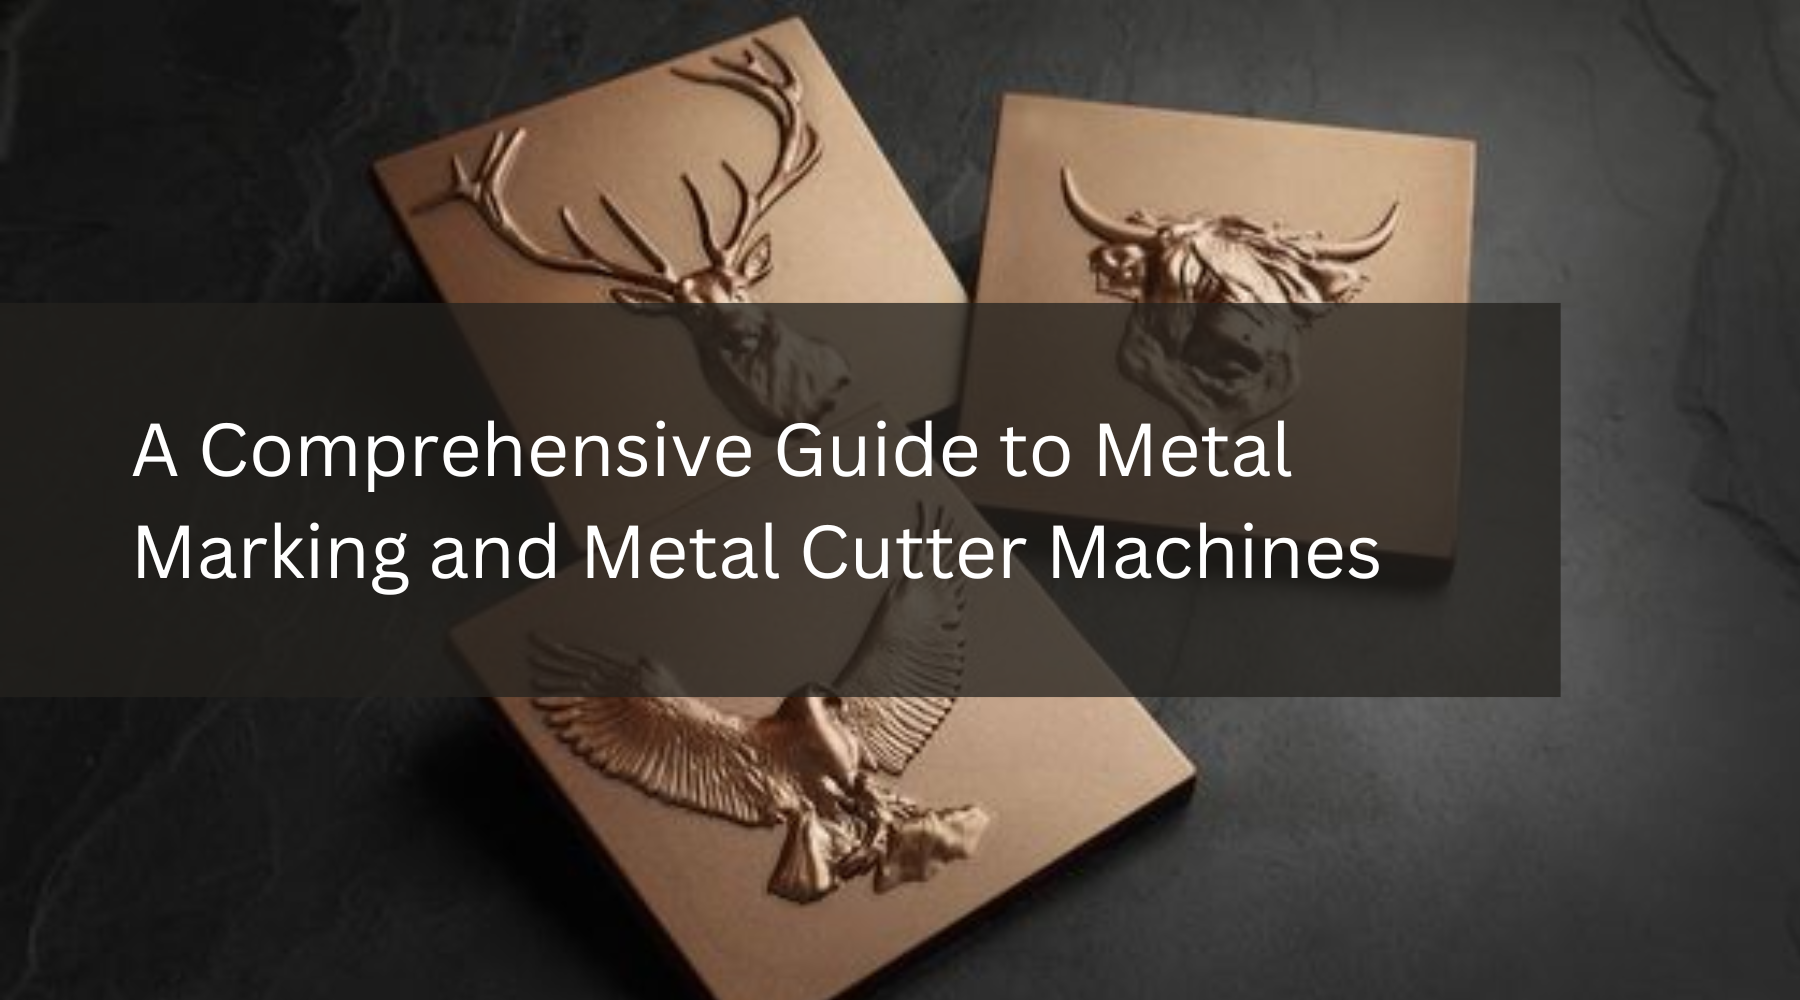 A Comprehensive Guide to Metal Marking and Metal Cutter Machines